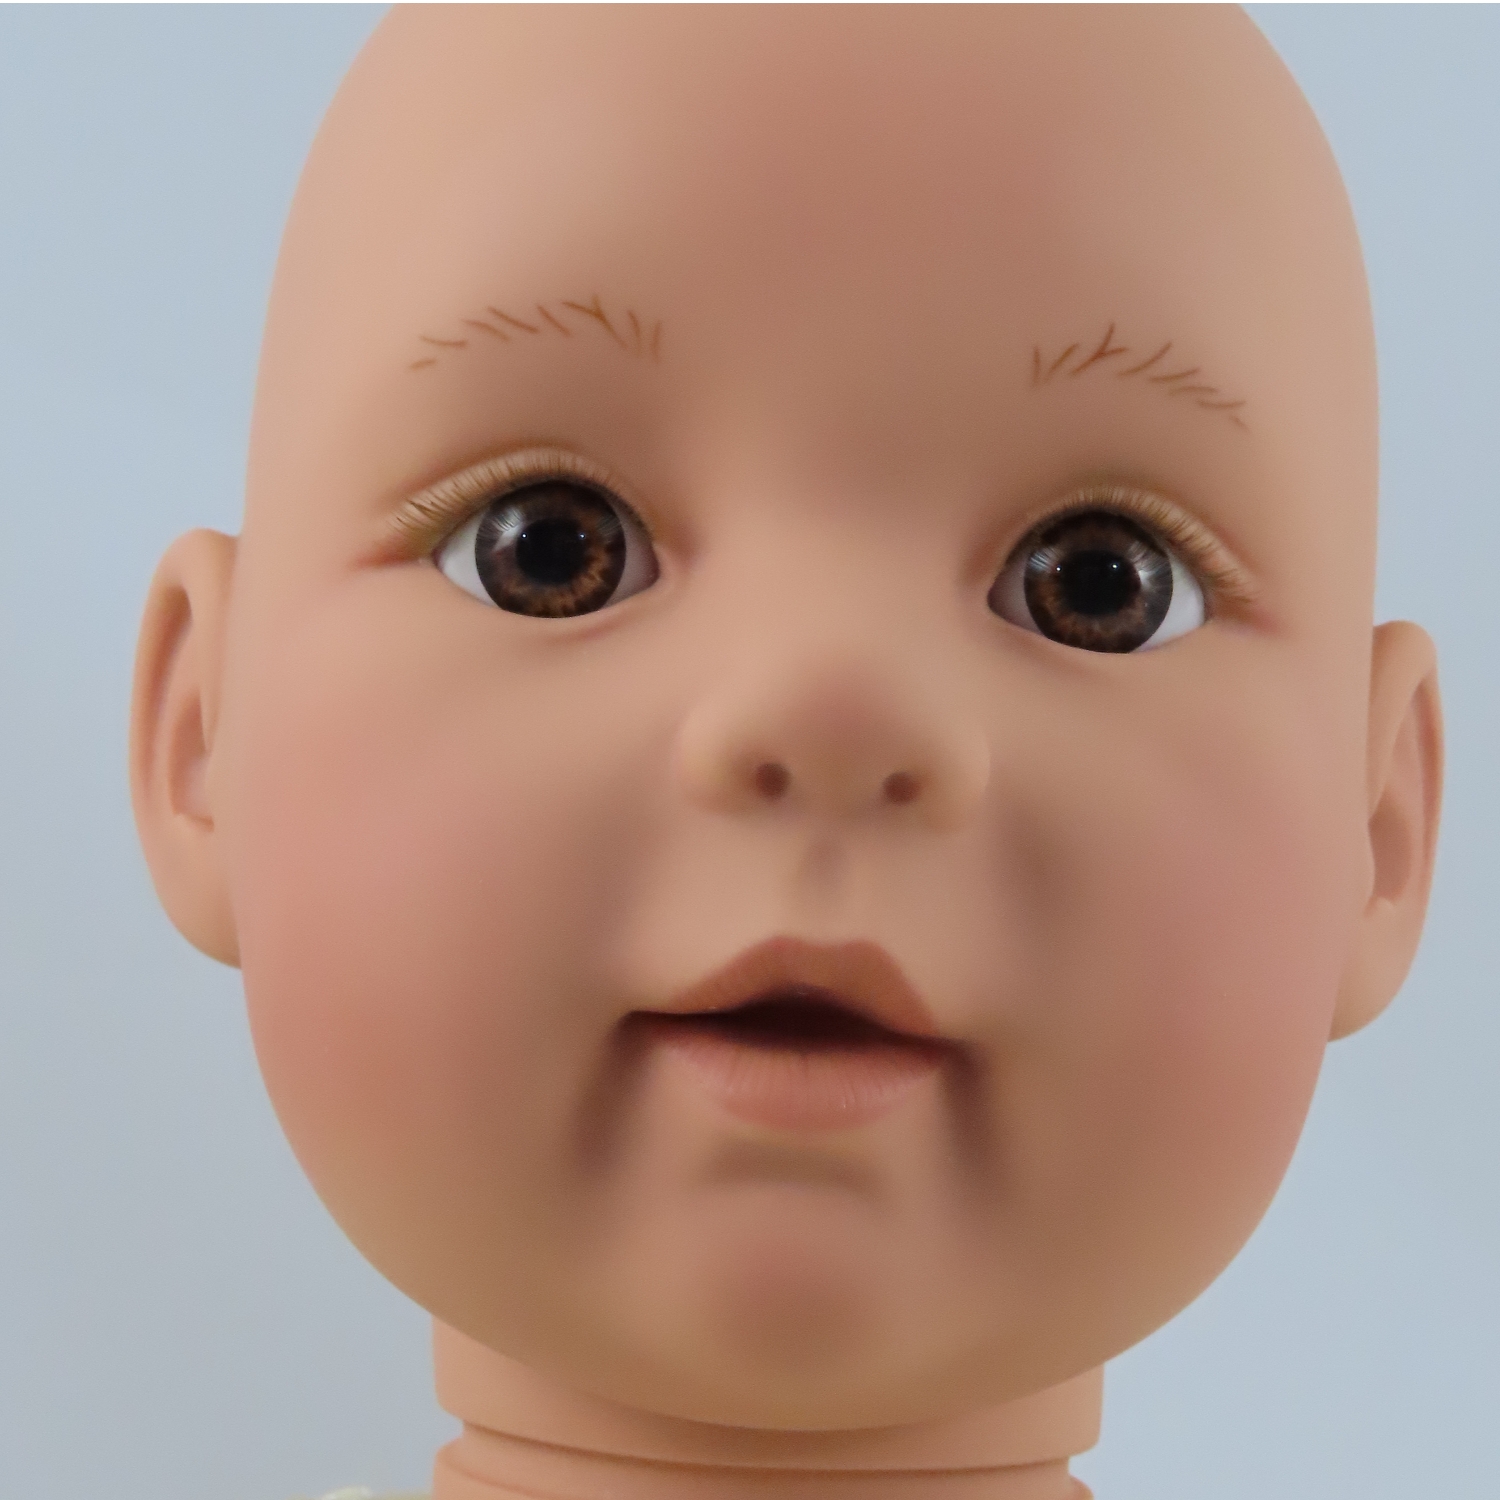 Joanna Doll Kit for Creating Toddler and Baby Dolls That Look Real